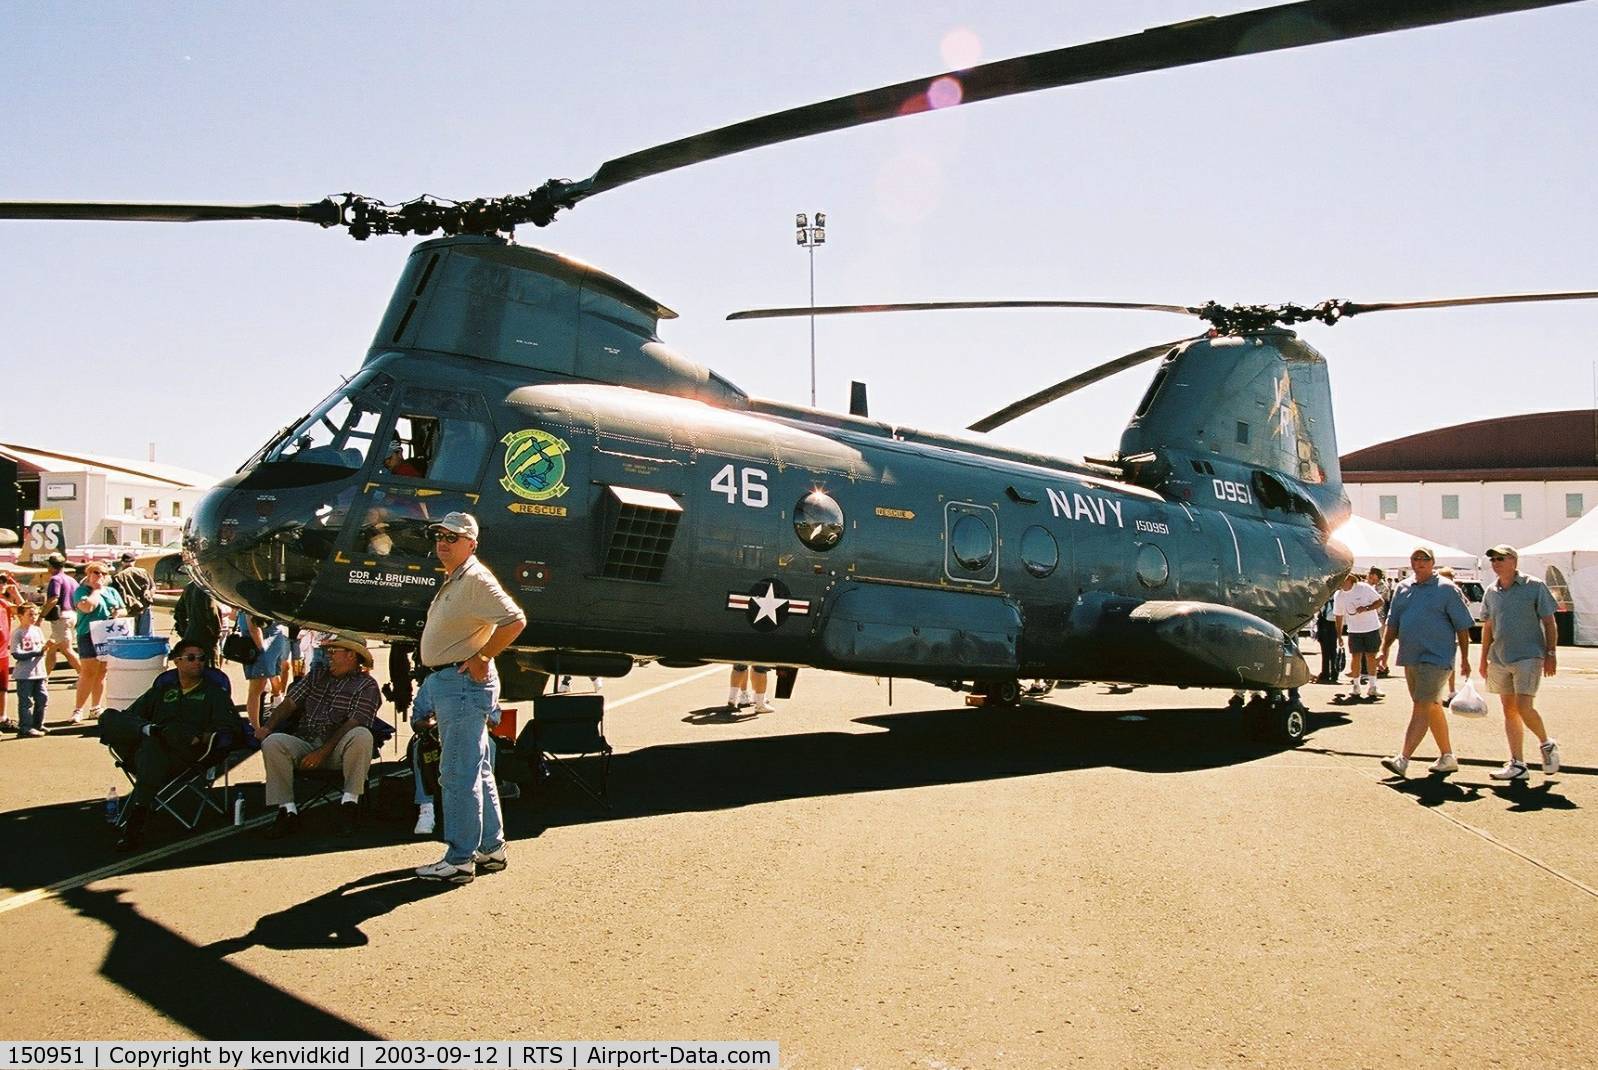 150951, 1962 Boeing Vertol HH-46A Sea Knight C/N 2036, At the 2003 Reno Air Races.